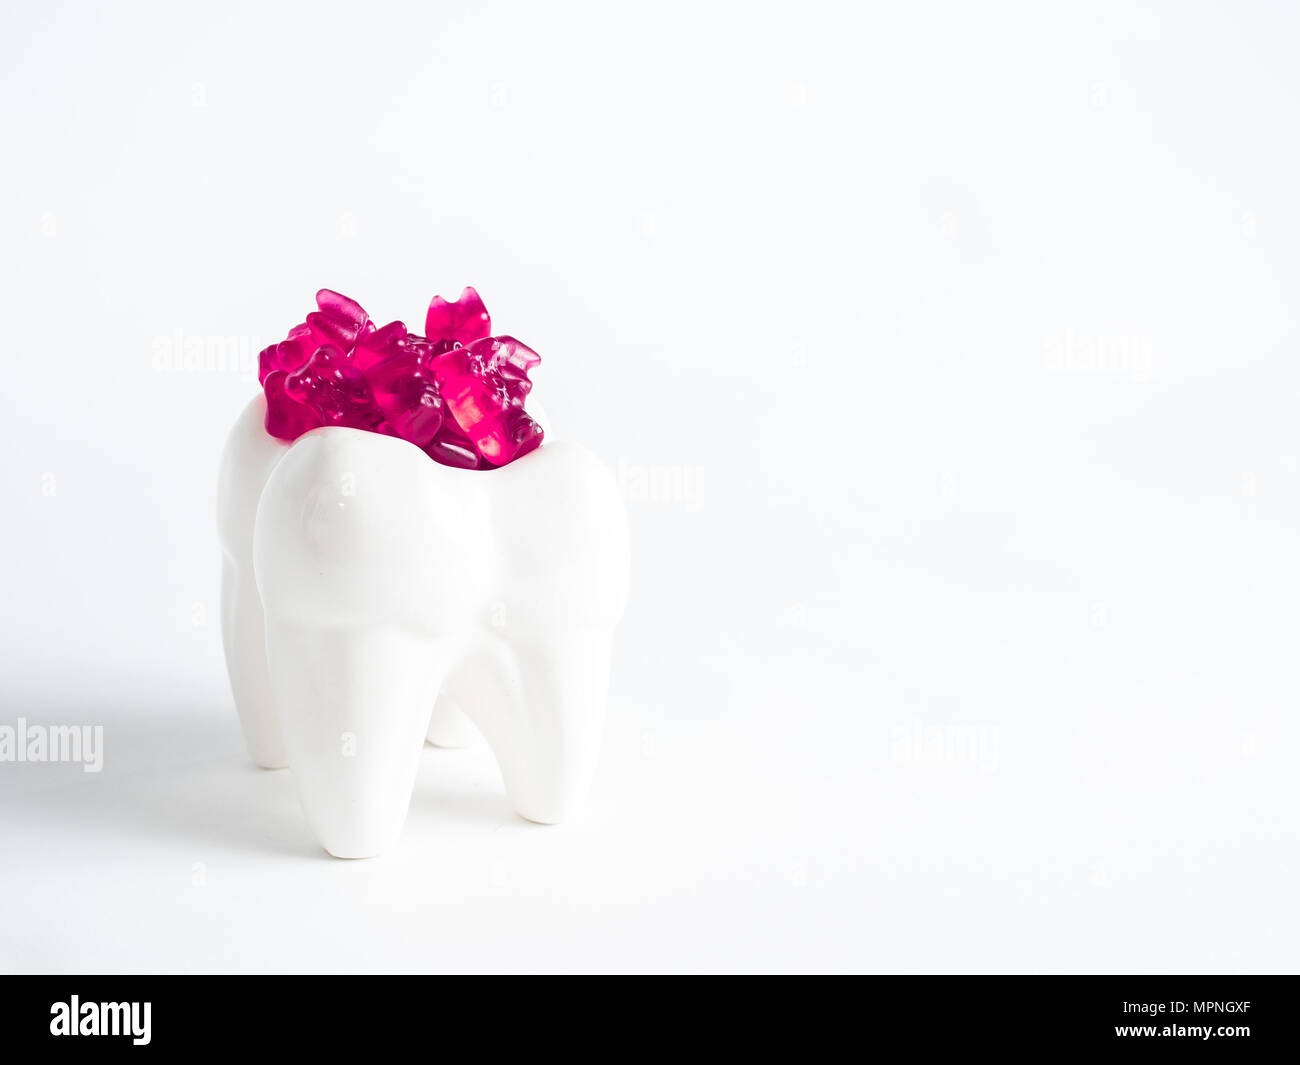 The porcelain tooth is filled with gummy bears against a white background Stock Photo